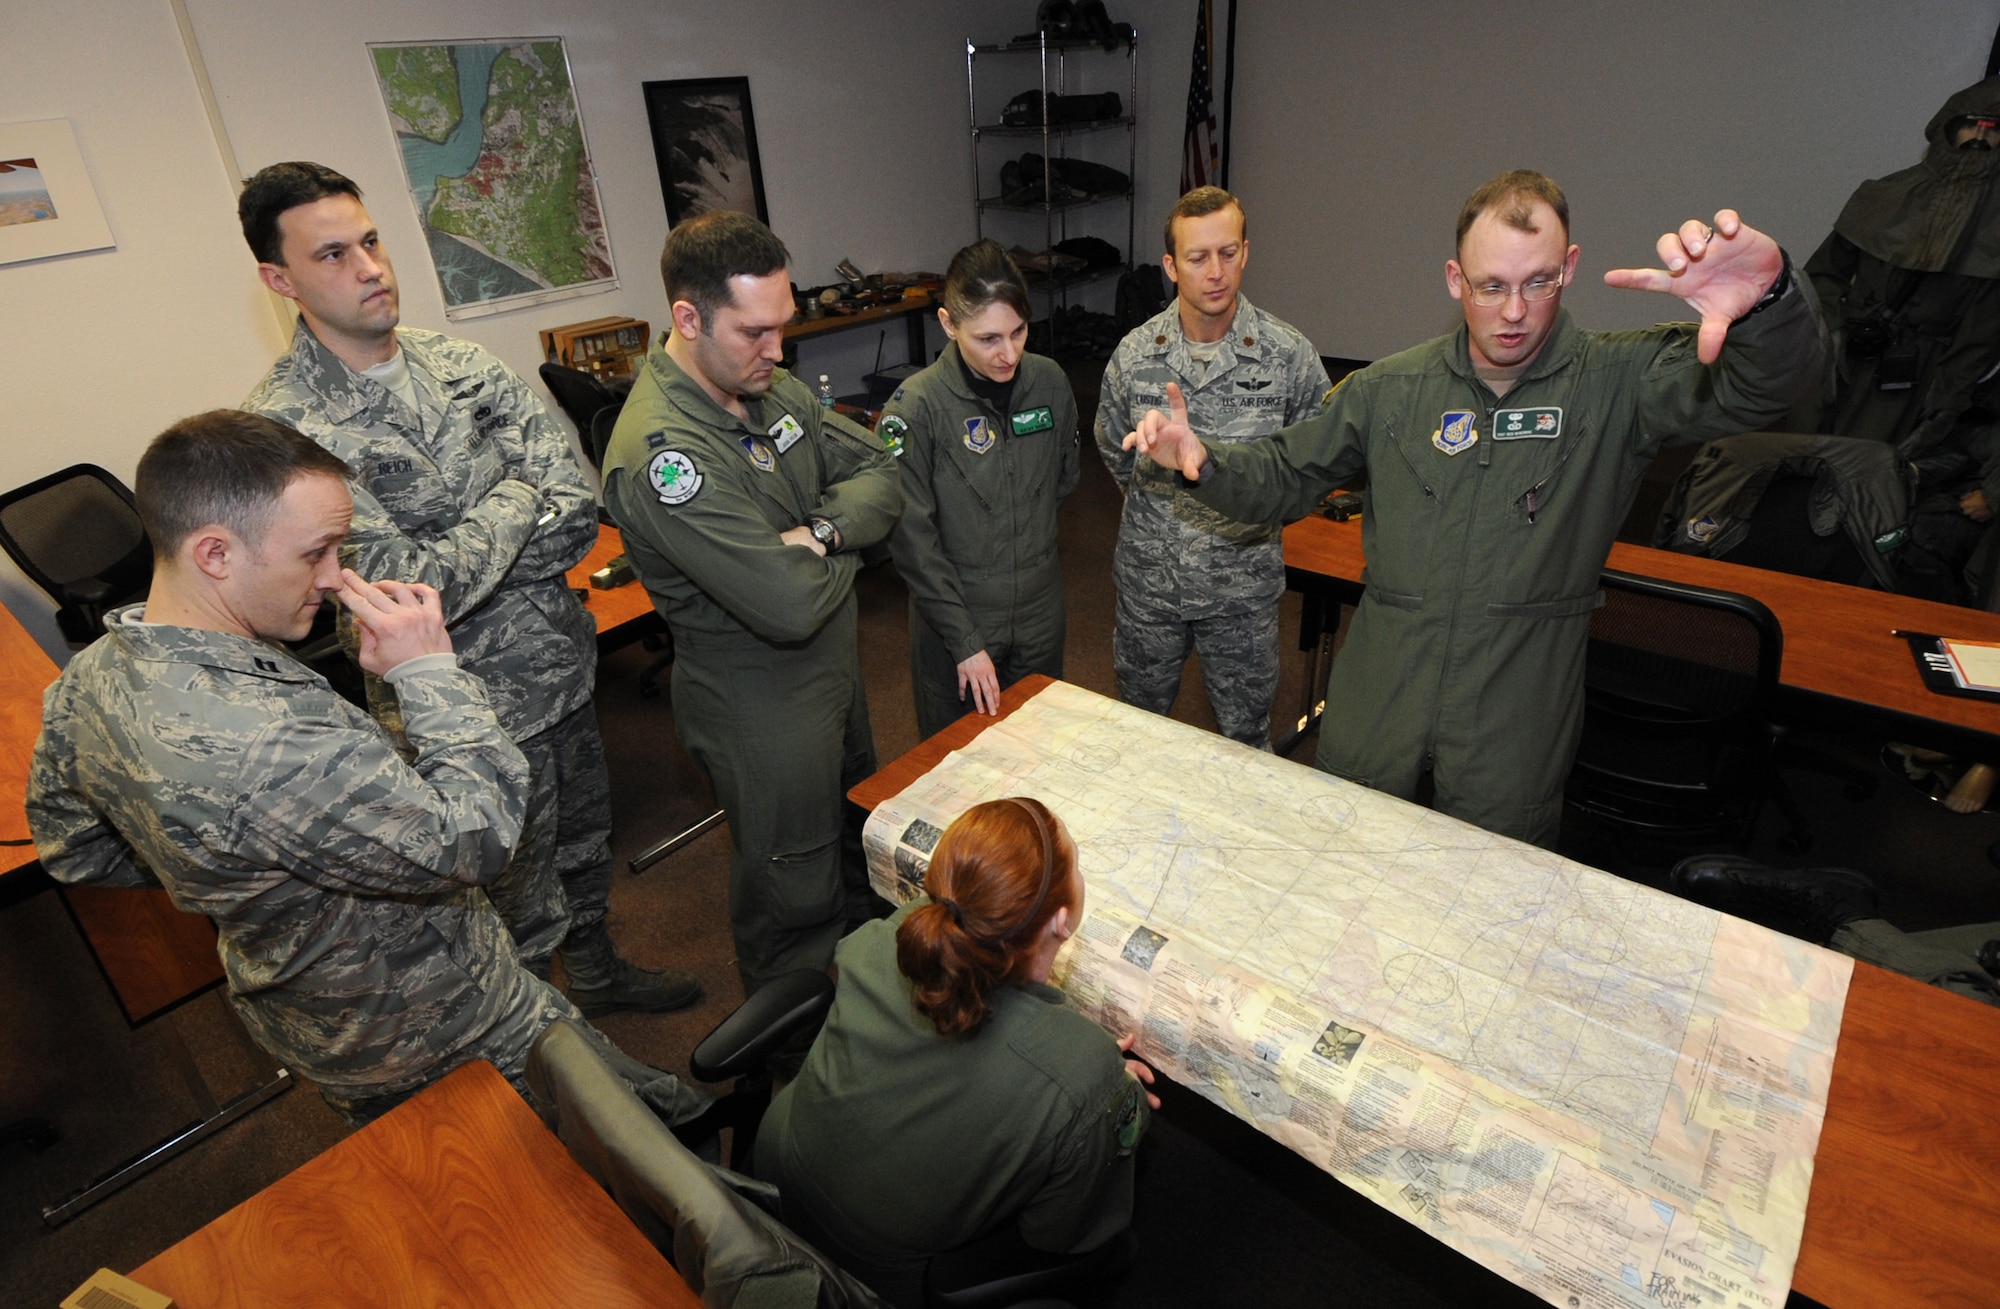 ELMENDORF AIR FORCE BASE, Alaska -- Staff Sgt. Reid Beveridge instructs a class about how to pinpoint coordinates on a map during Survival, Evasion, Resistance and Escape training April 12. The classroom SERE training covered hands on learning with maps, GPS units and radios. Sergeant Beveridge is a SERE specialist with the 3rd Operation Support Squadron Weapons and Tactics Flight. (Air Force photo by Senior Airman Cynthia Spalding)